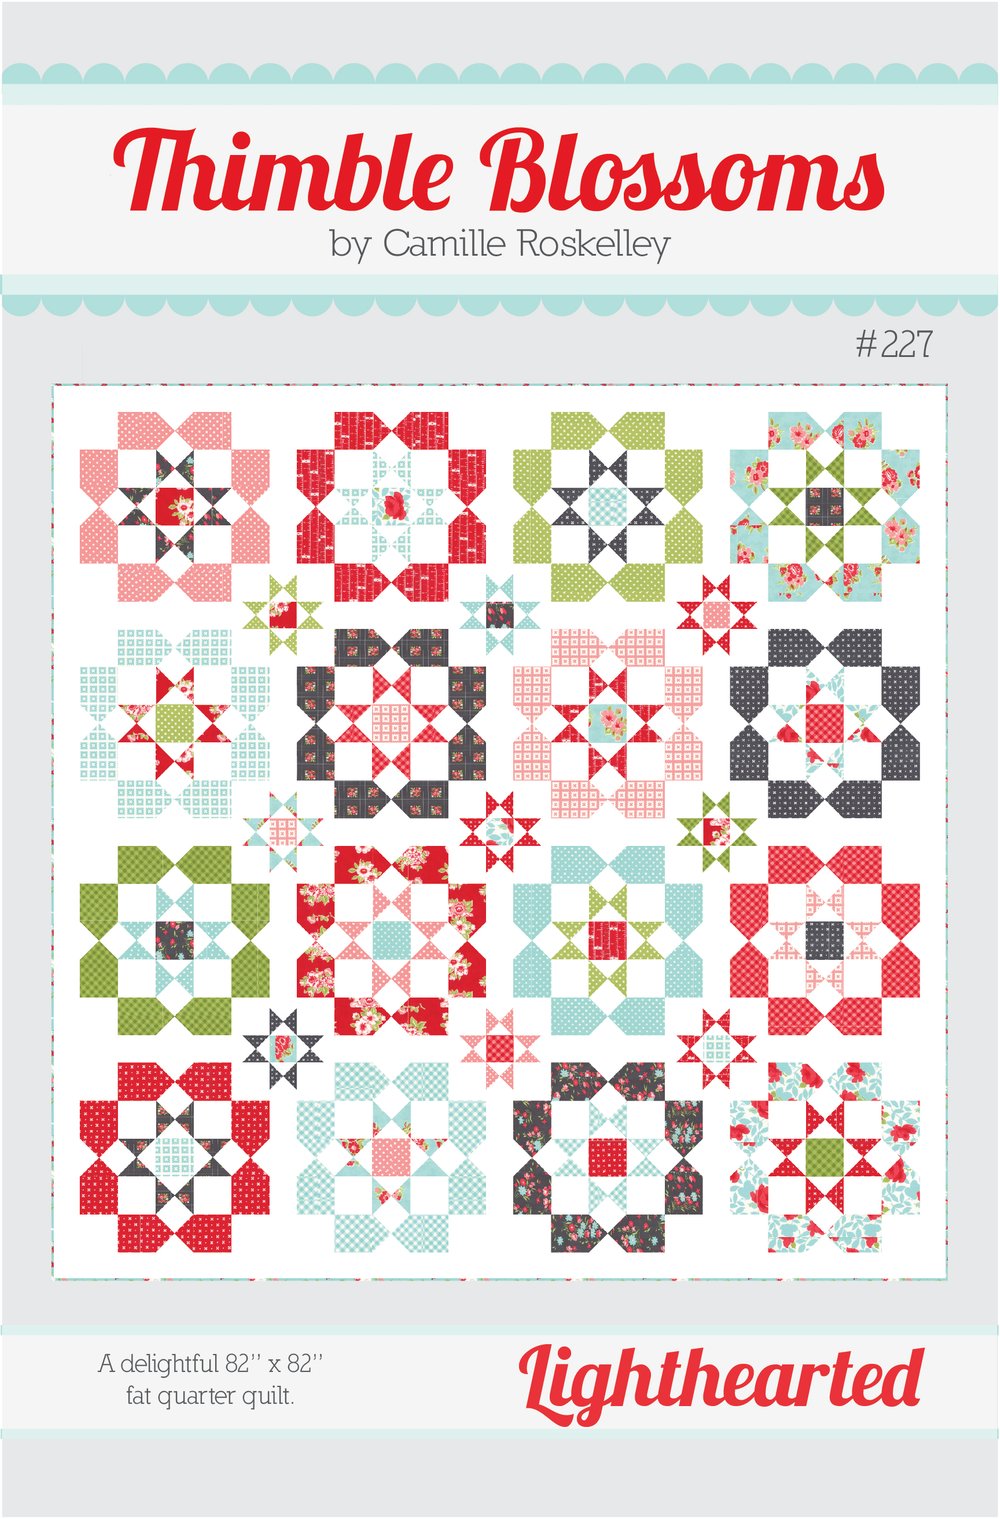 Lighthearted TB 227G Quilt Pattern by Camille Roskelley of Thimble Blossoms